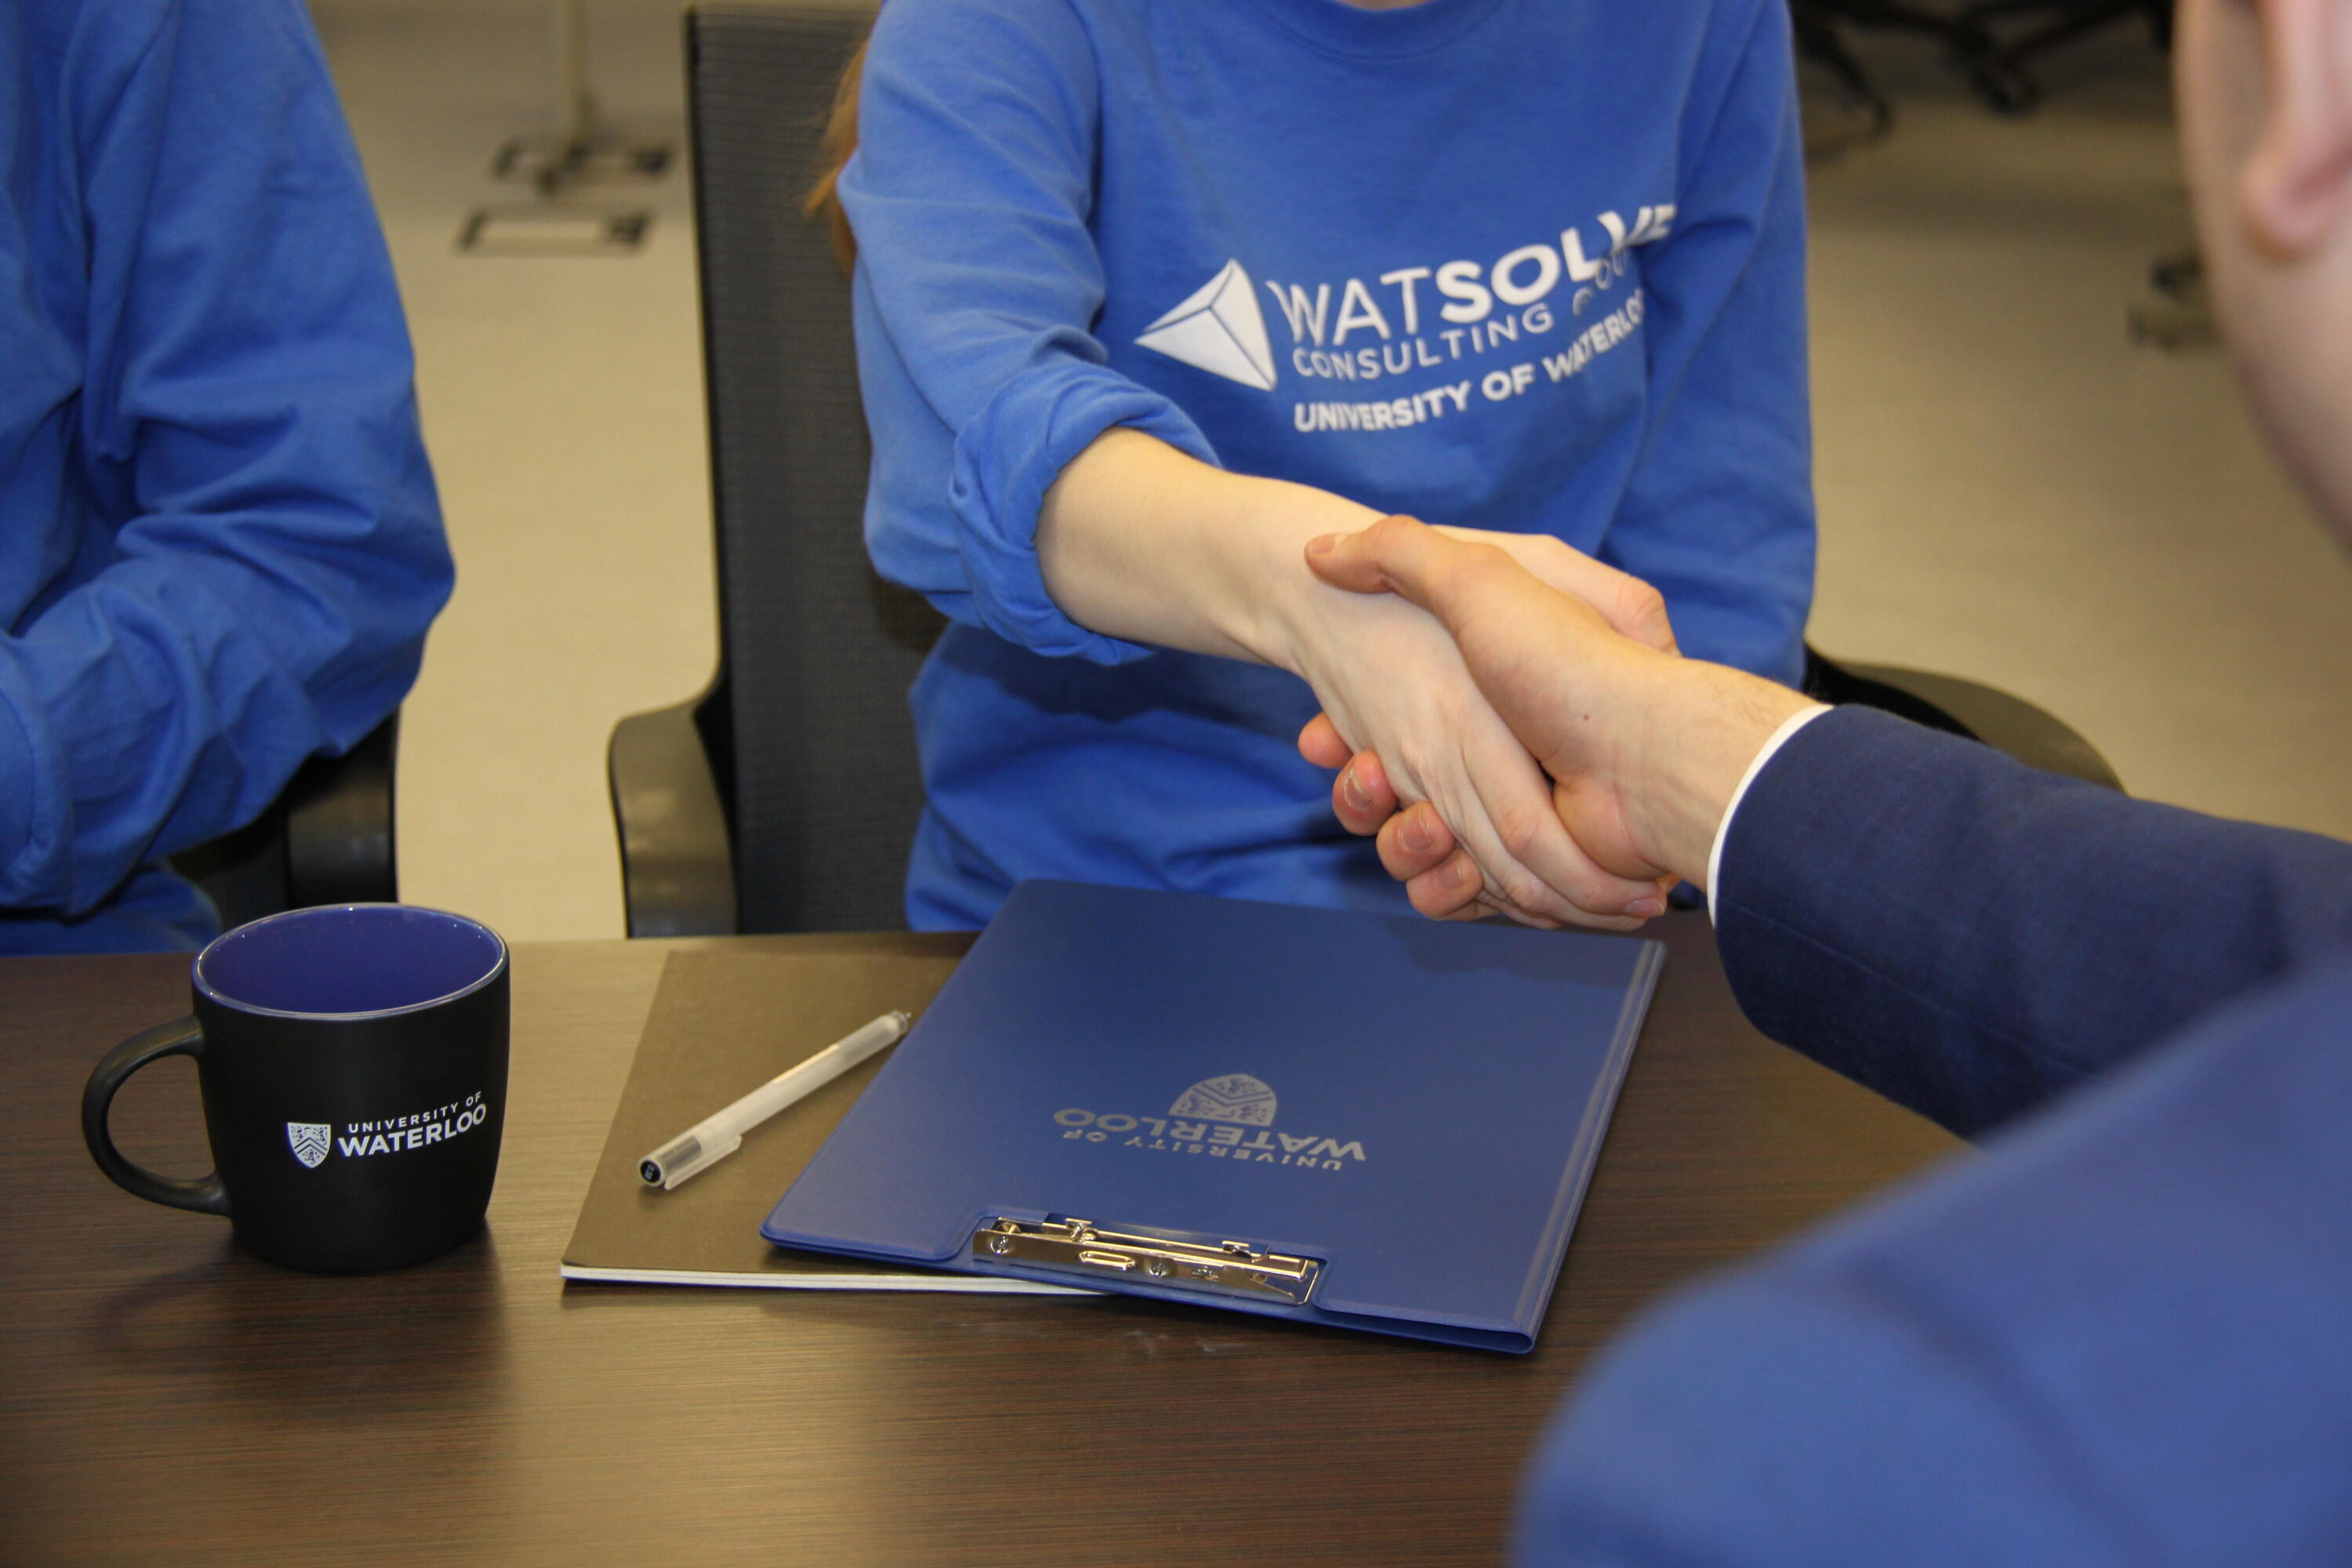 Handshake with blue Waterloo branded mug and notebook on the table.